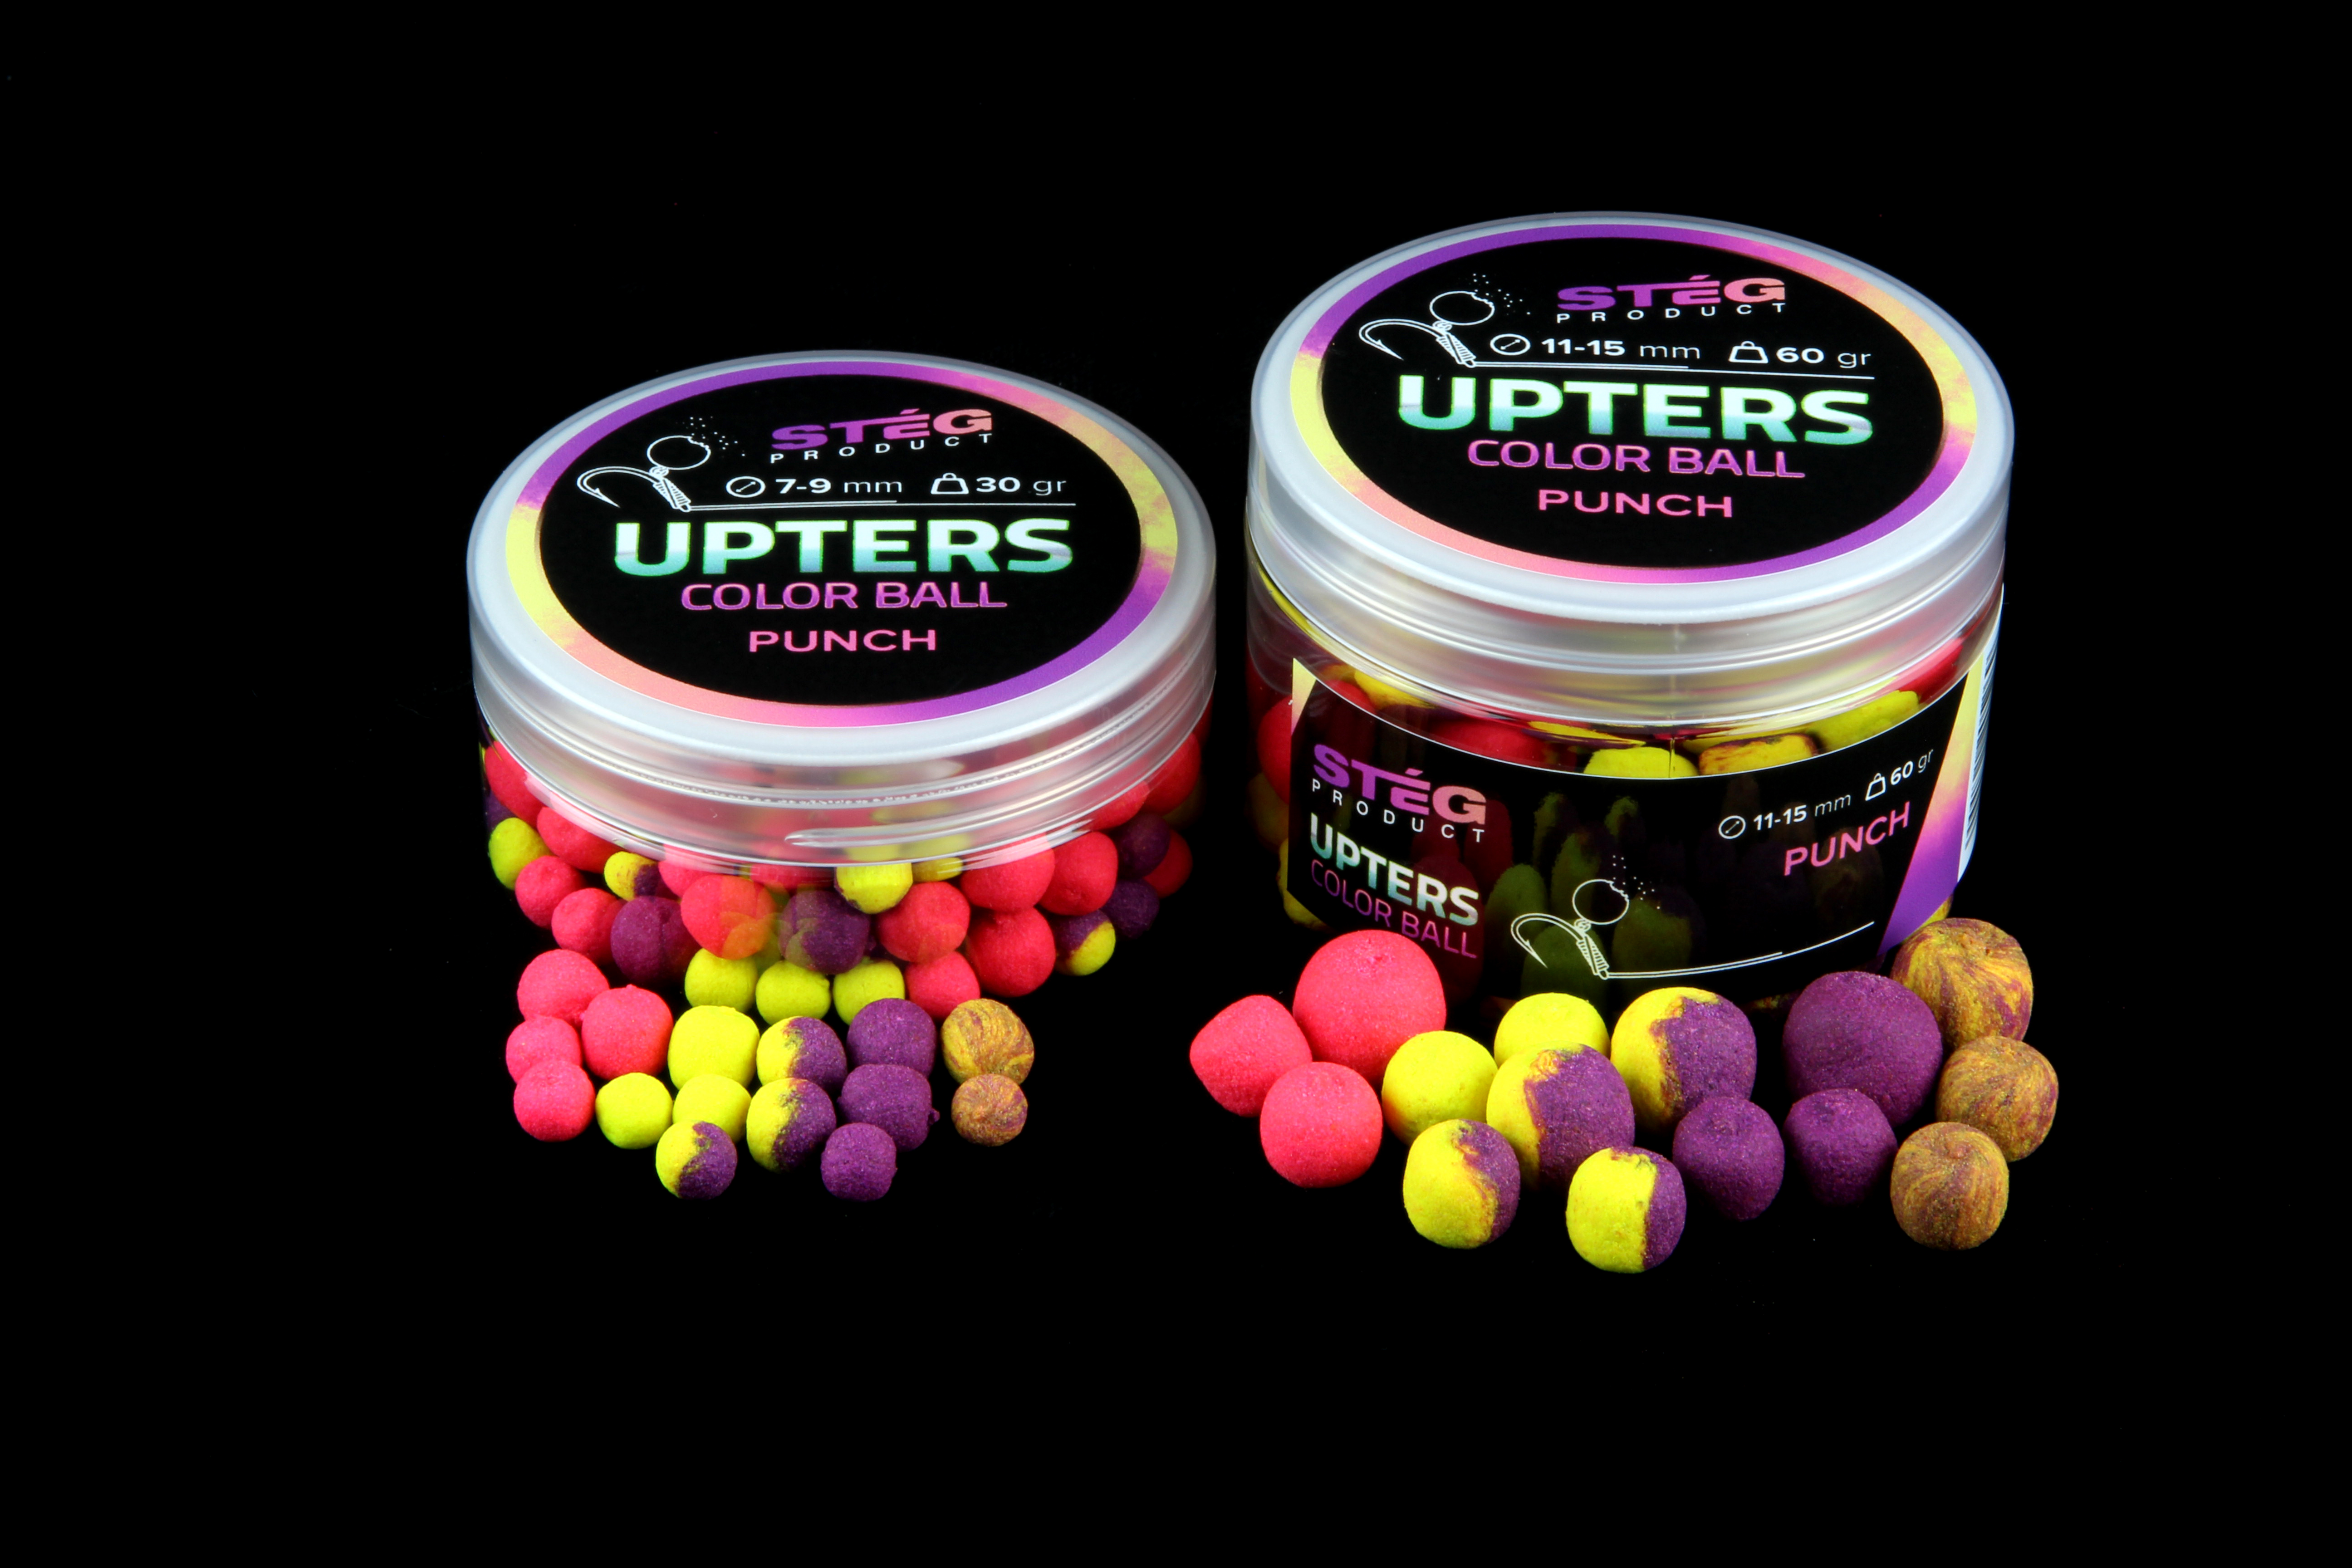 STÉG PRODUCT UPTERS COLOR BALL 7-9MM PUNCH 30G